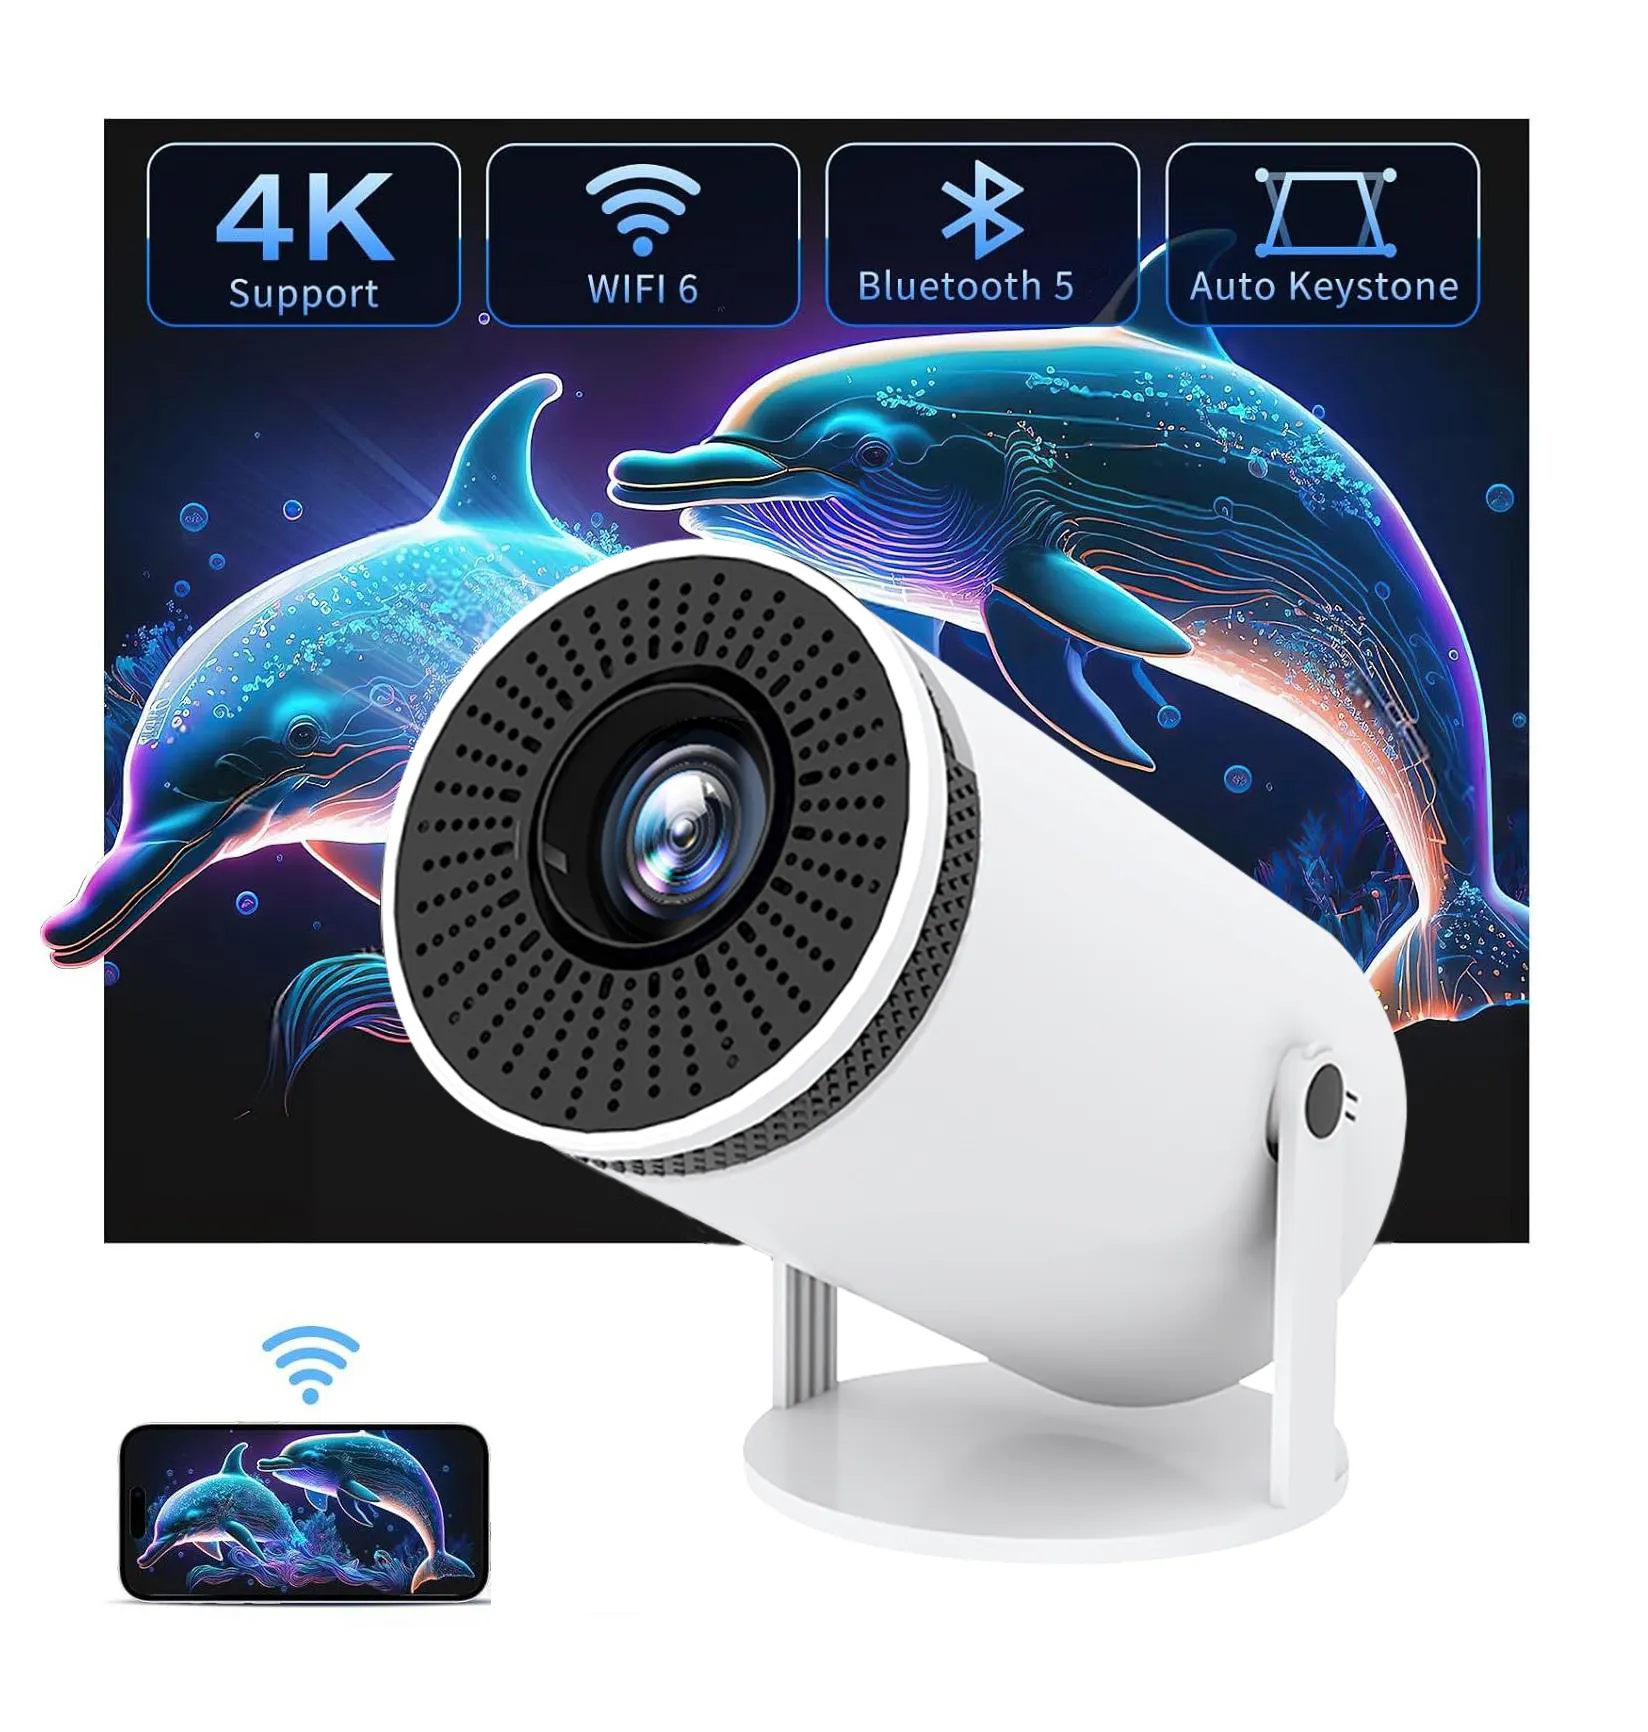 Hot Selling Draagbare Hy300 Mini Proyector Android Bluetooth Wifi6 720P Native 1080P Projectoren